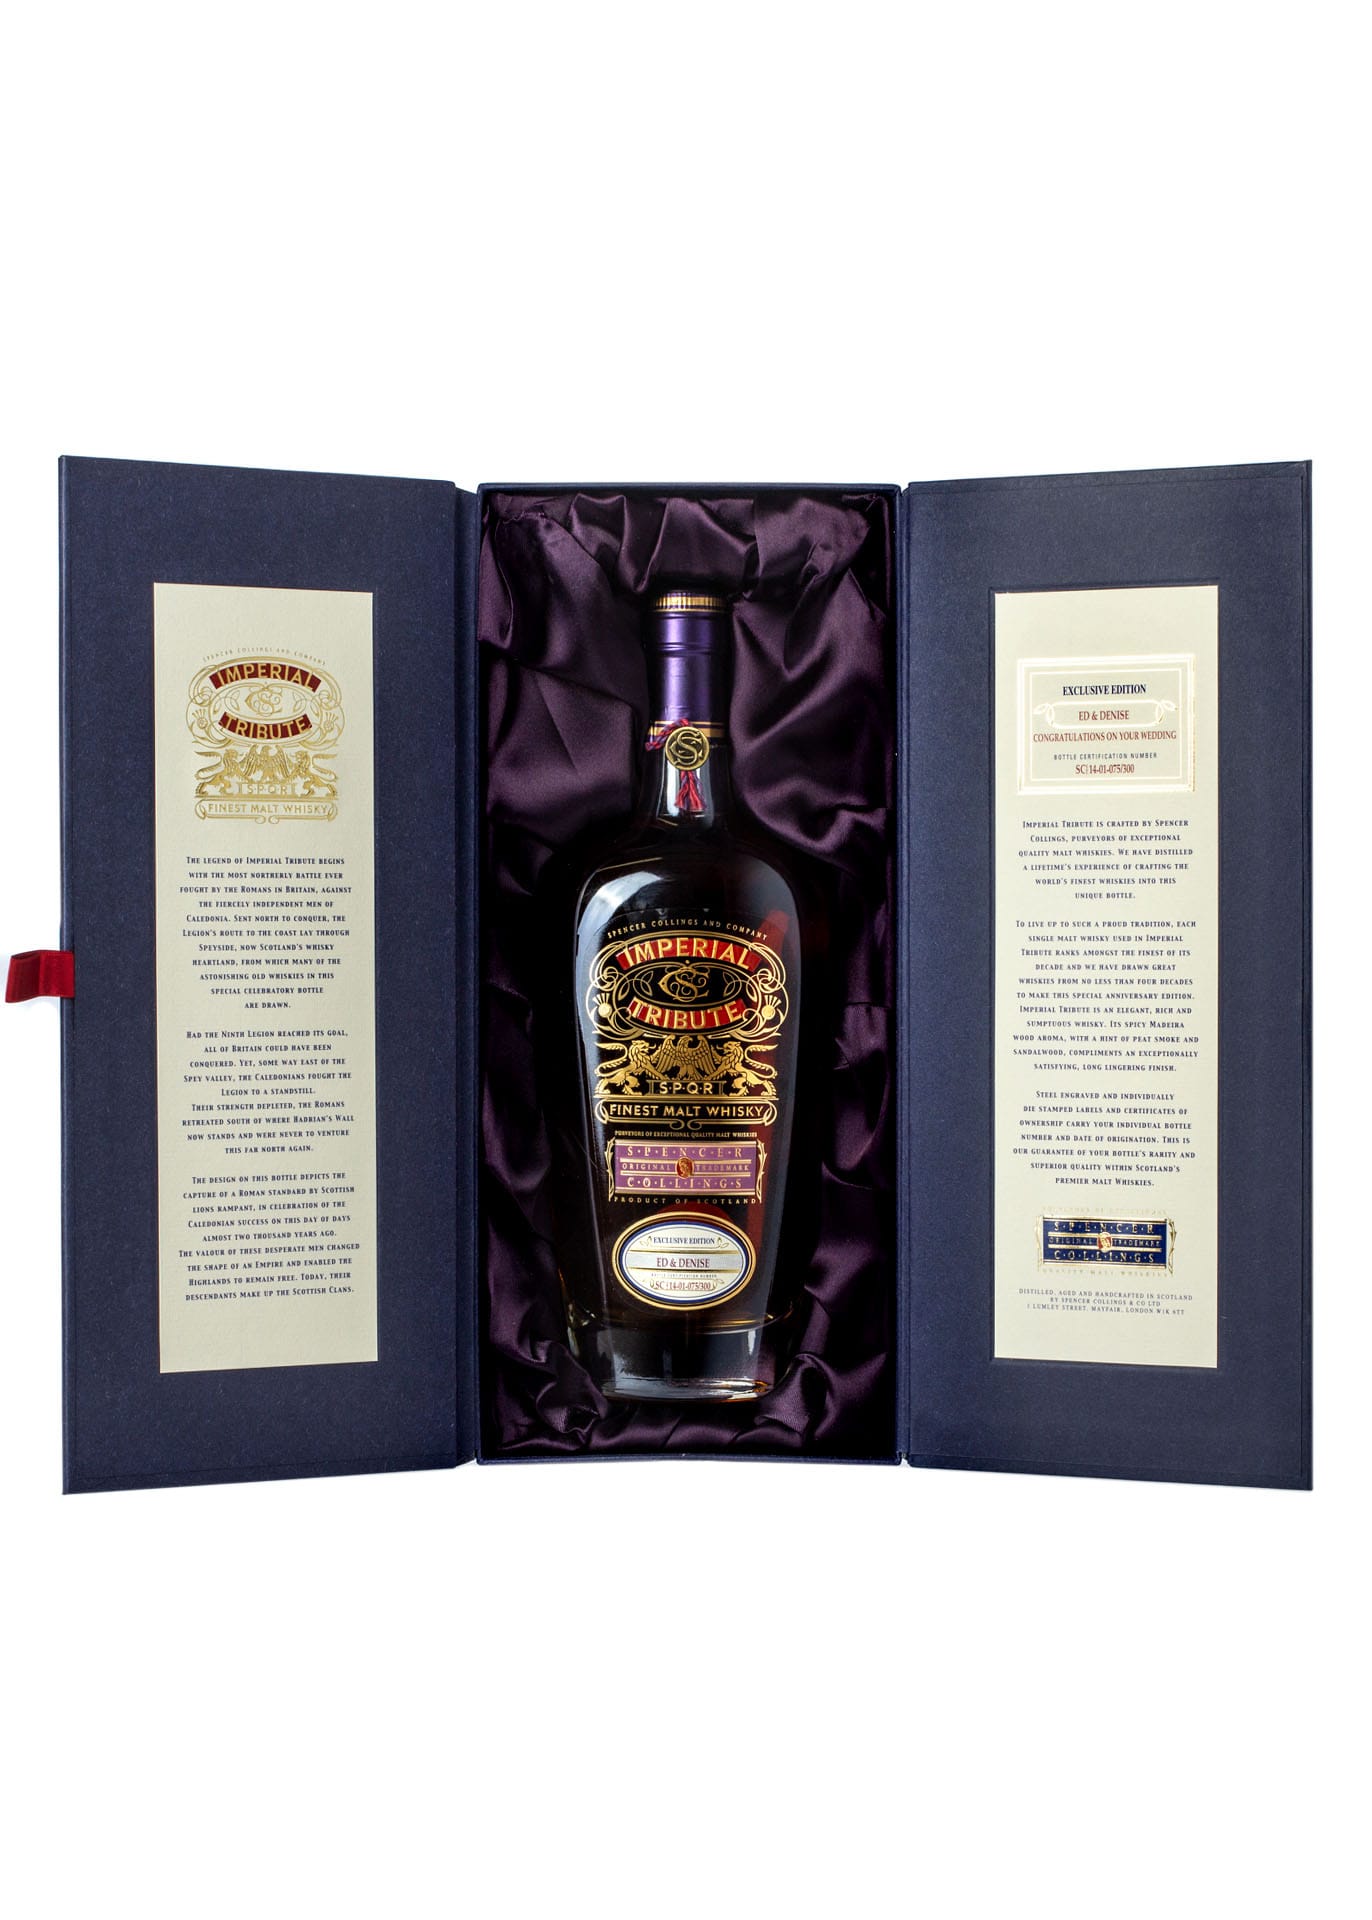 Scotch Gift from Imperial Tribute in luxury box